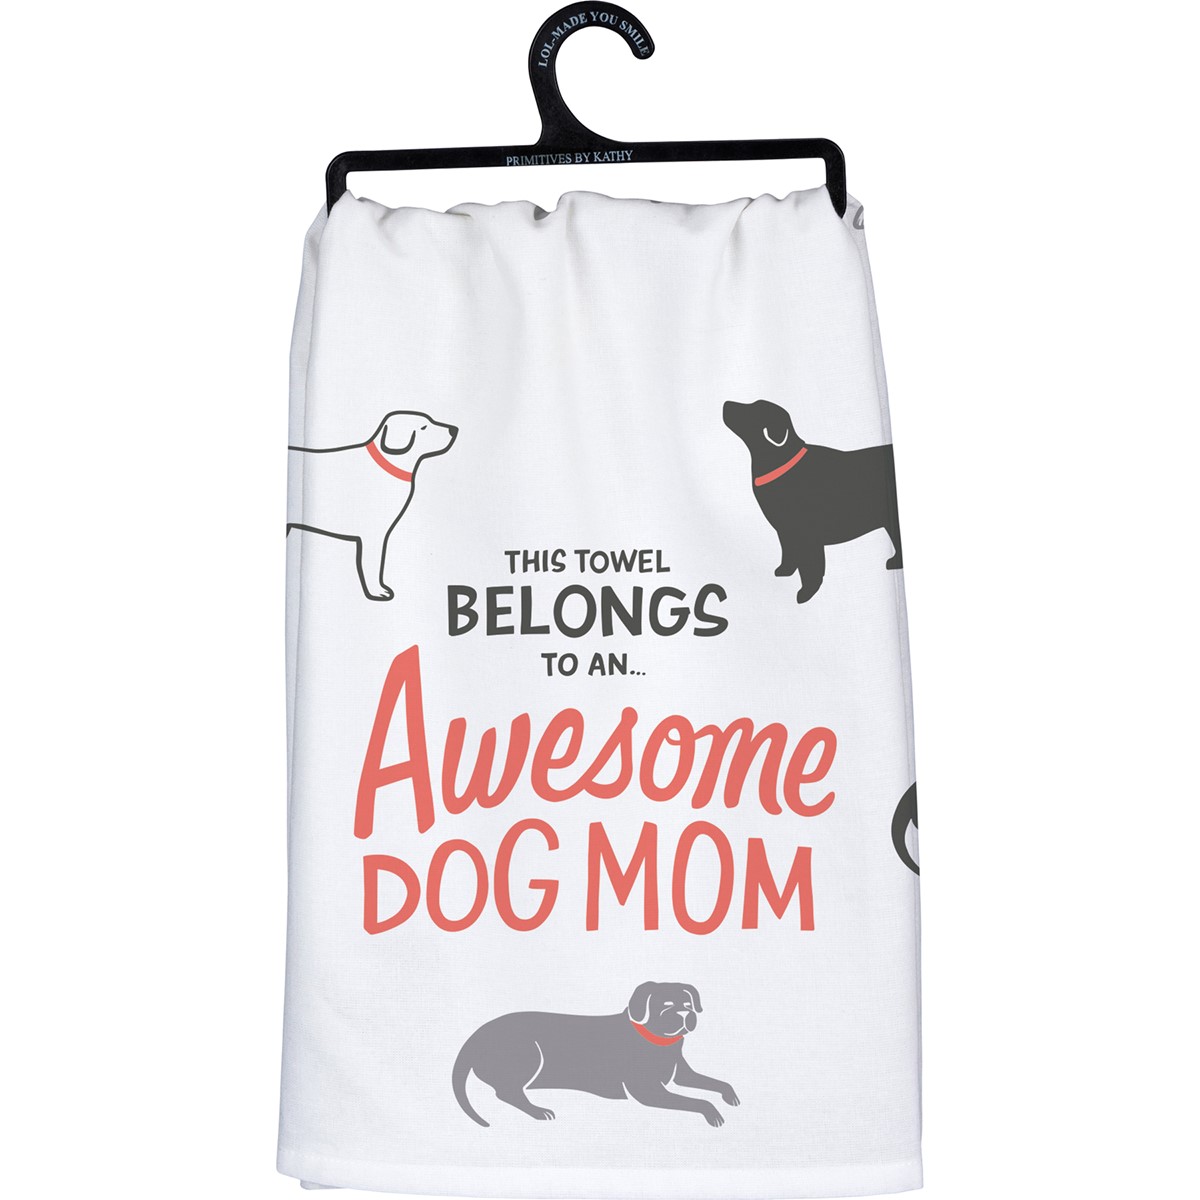 Kitchen Towel - Awesome Dog Mom - 28" x 28" - Cotton